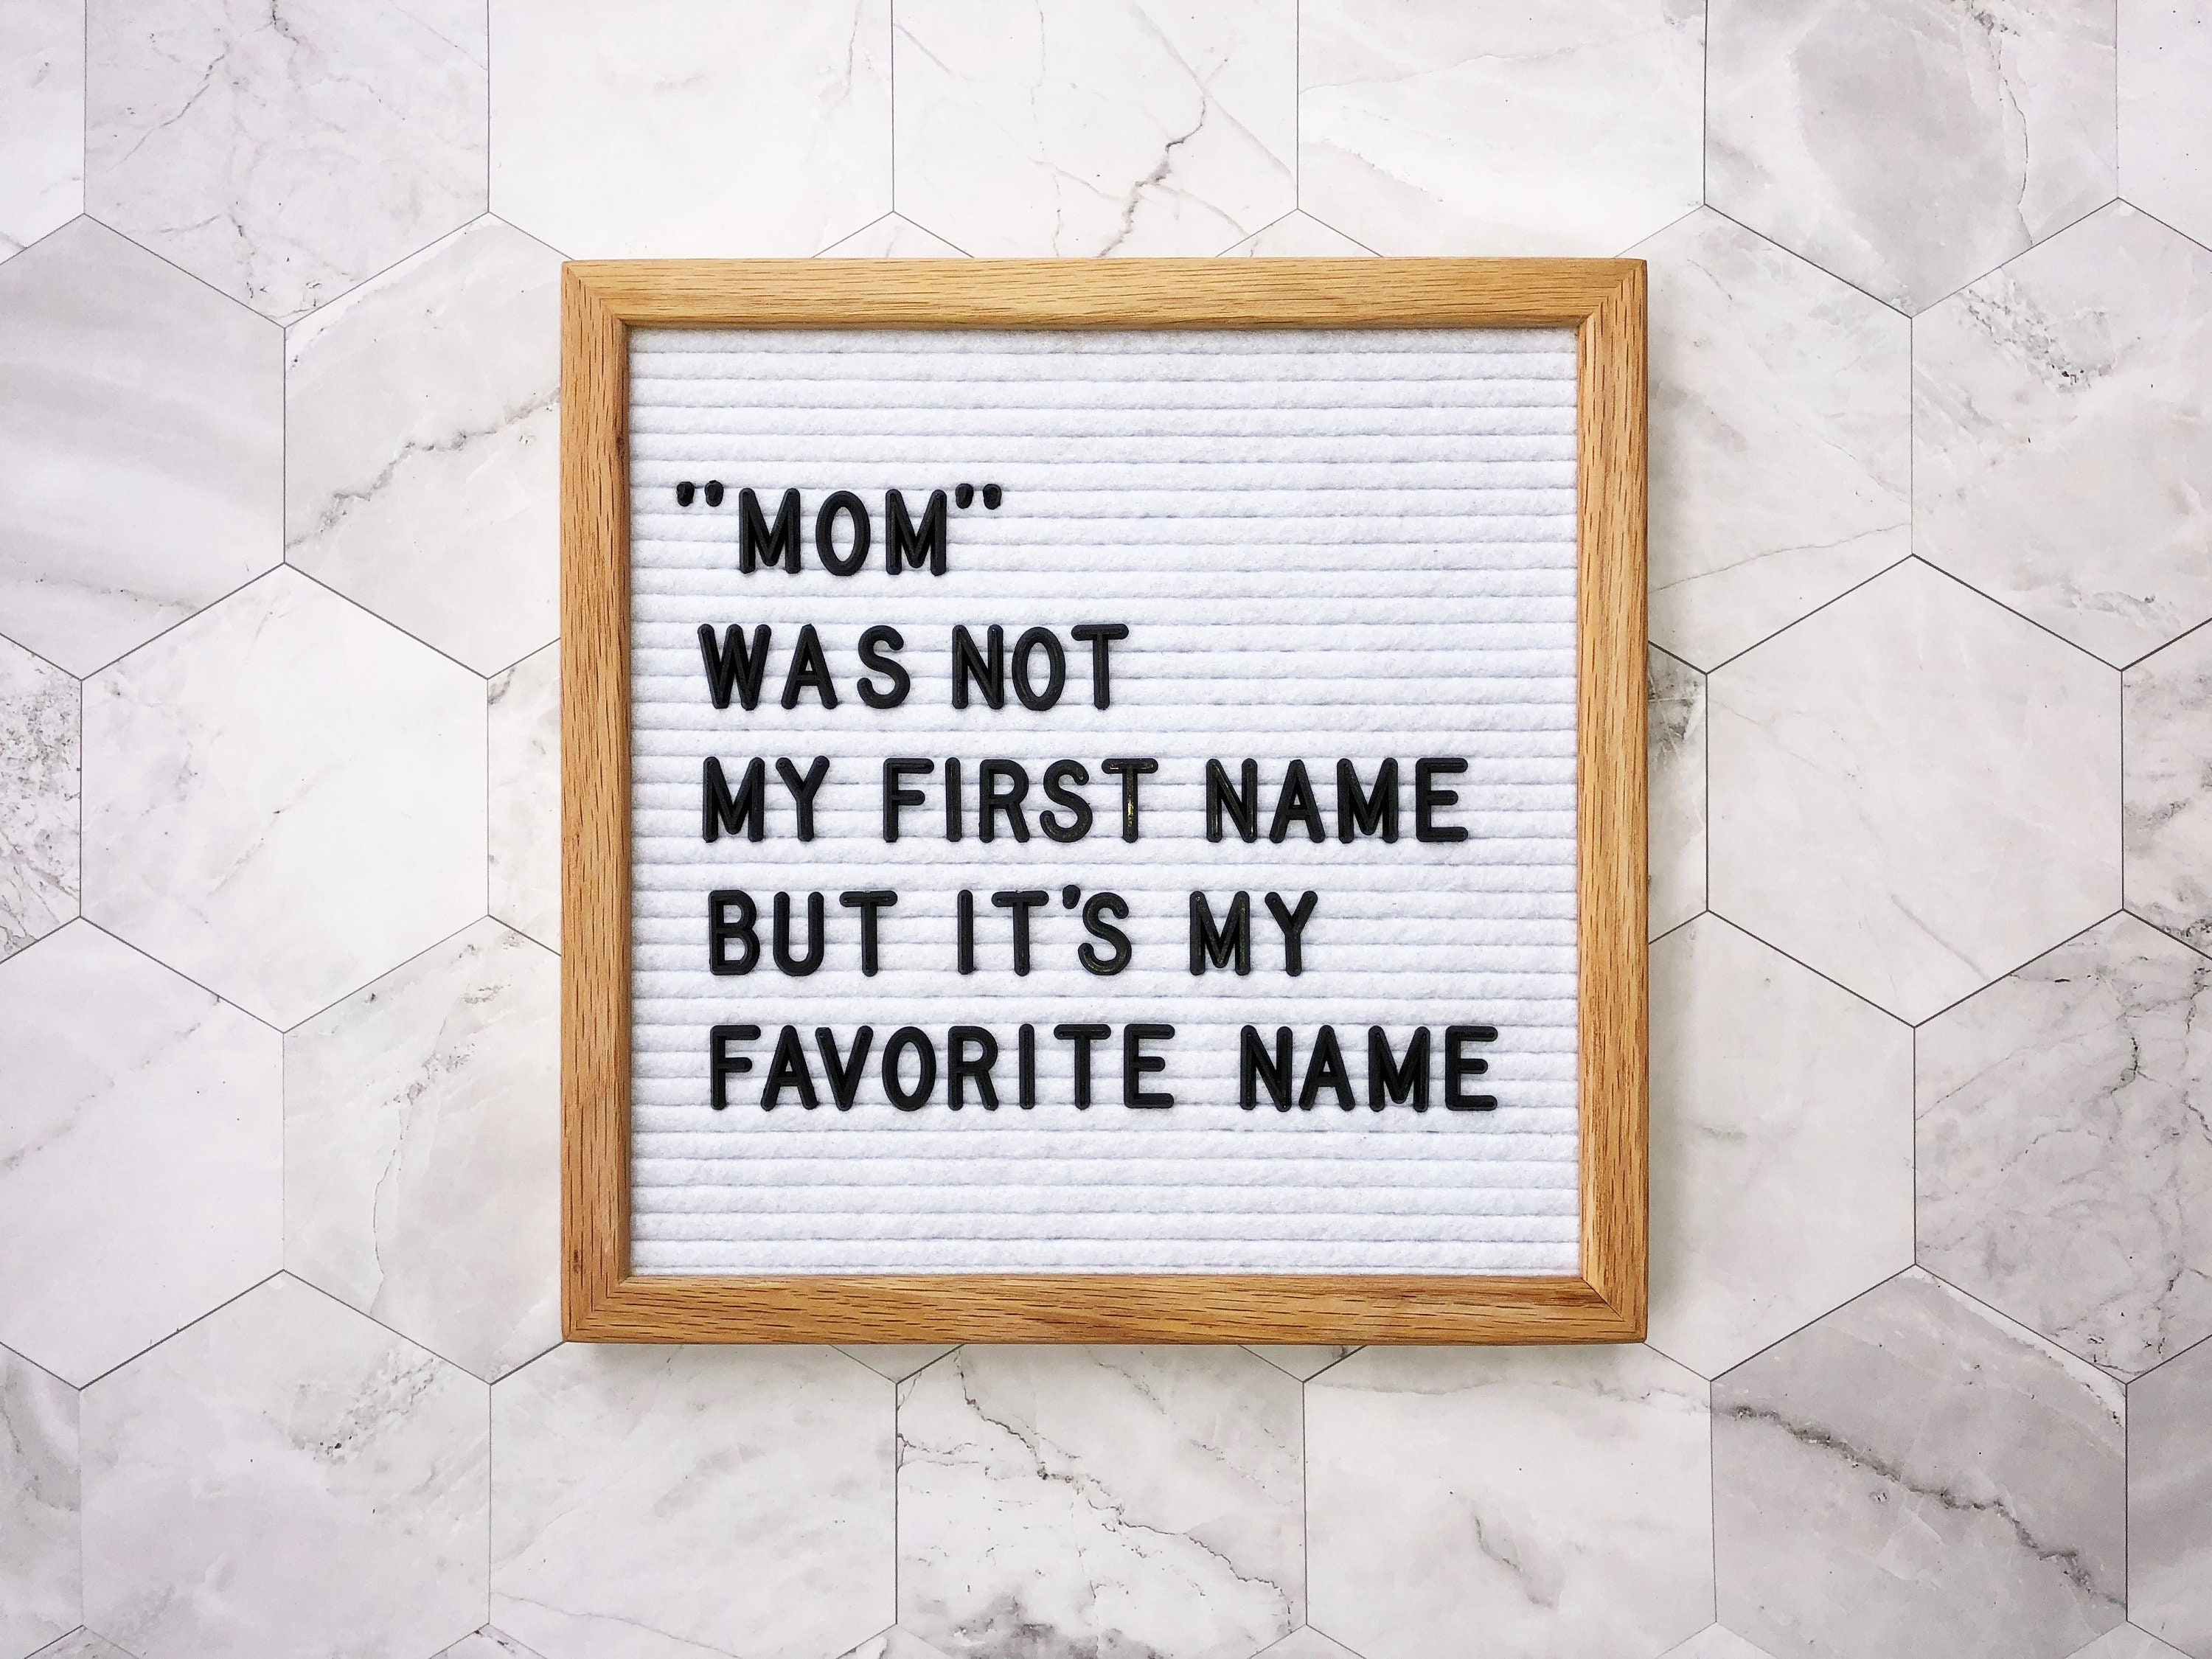 Mom is my fave name Felt Letter Board | Etsy